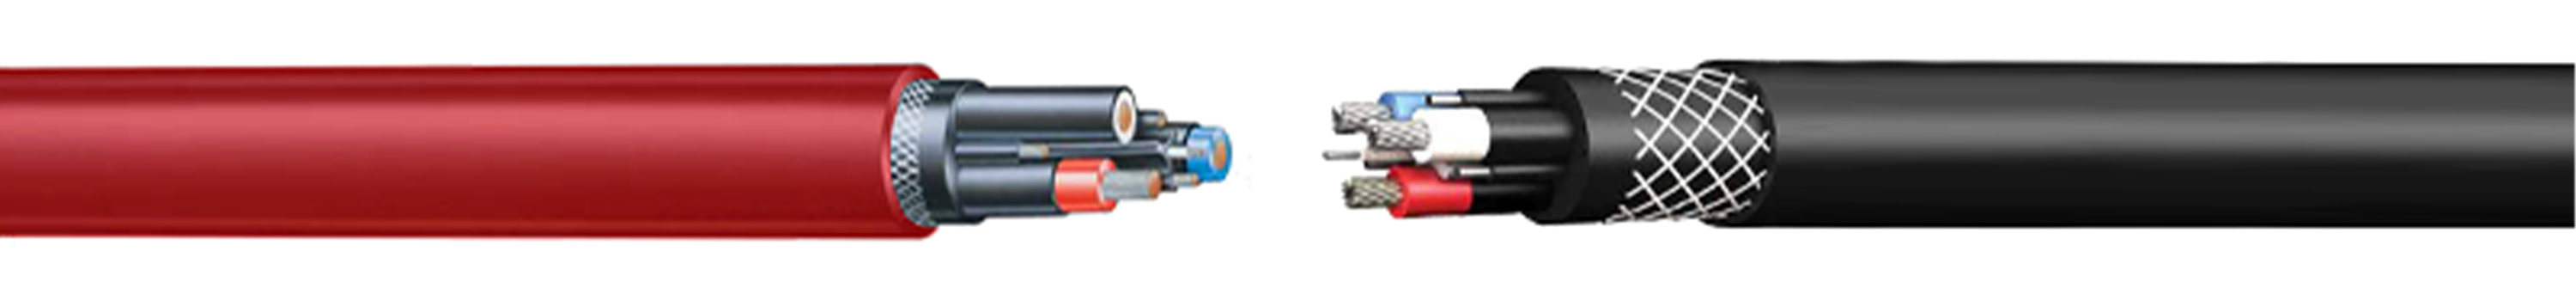 TYPE-241-SUPERFLEX-MINING-CABLES-AS-NZS-1802